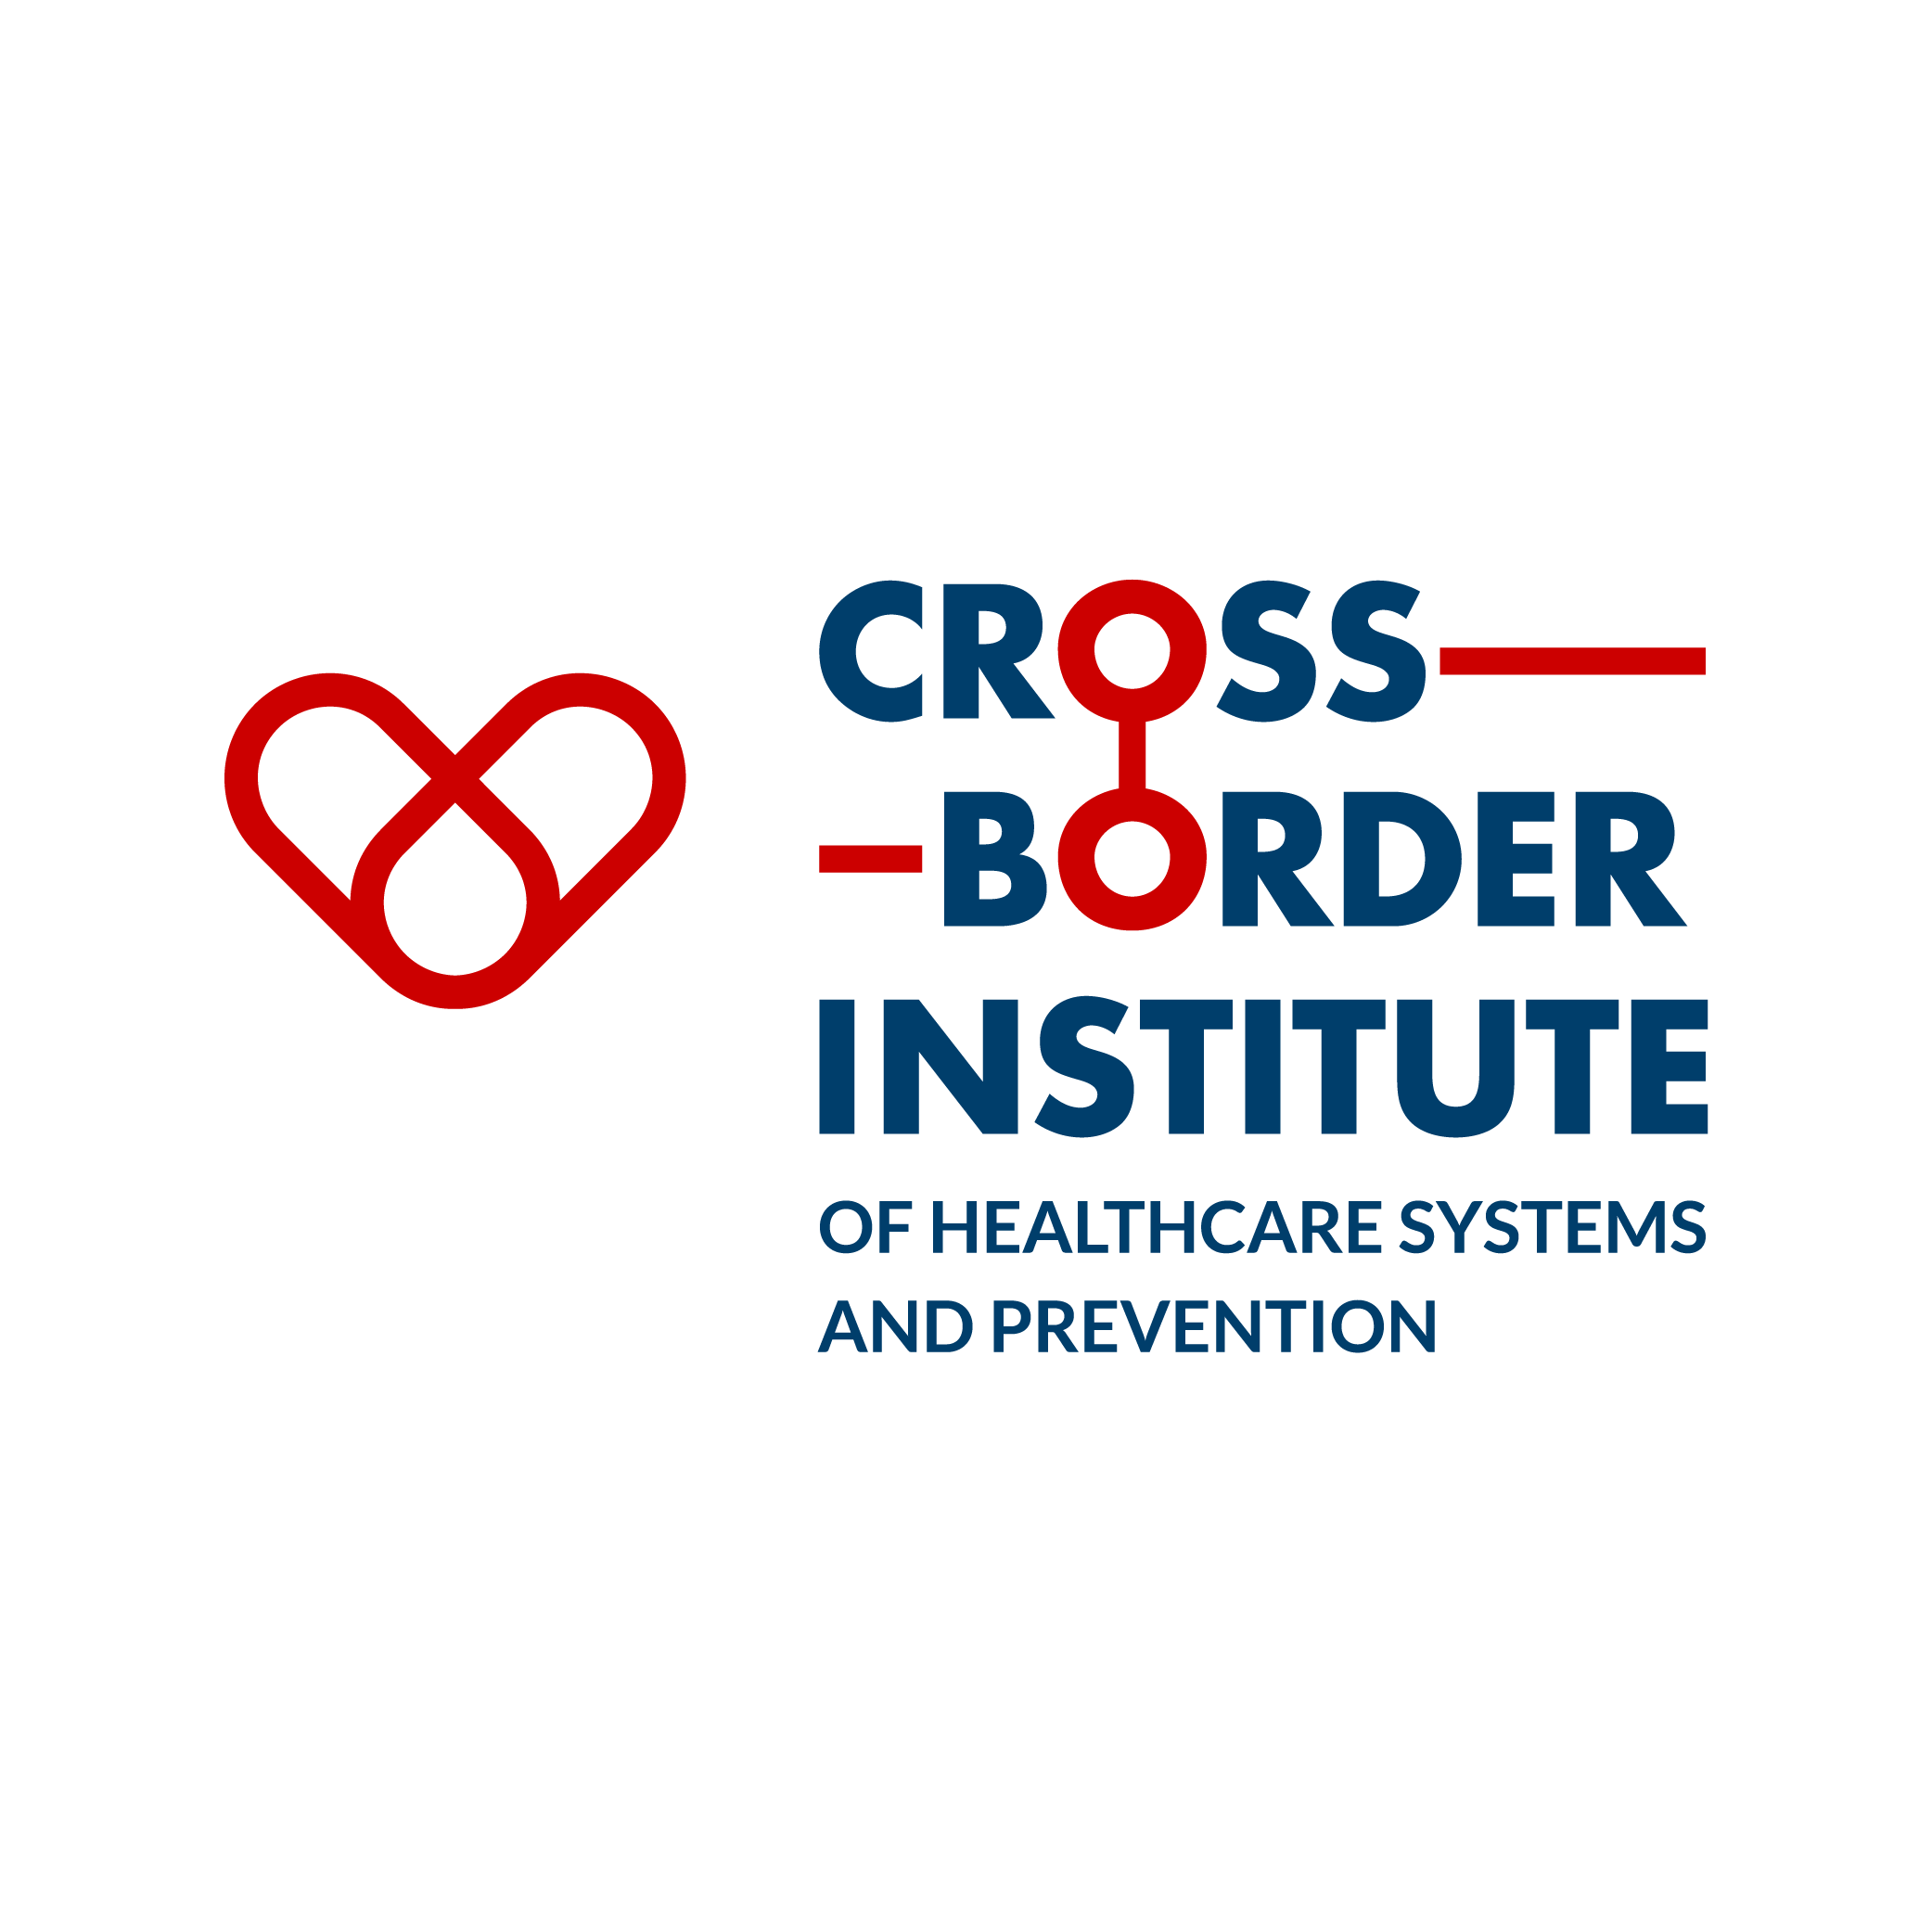 Cross-border Institute of Healthcare Systems and Prevention